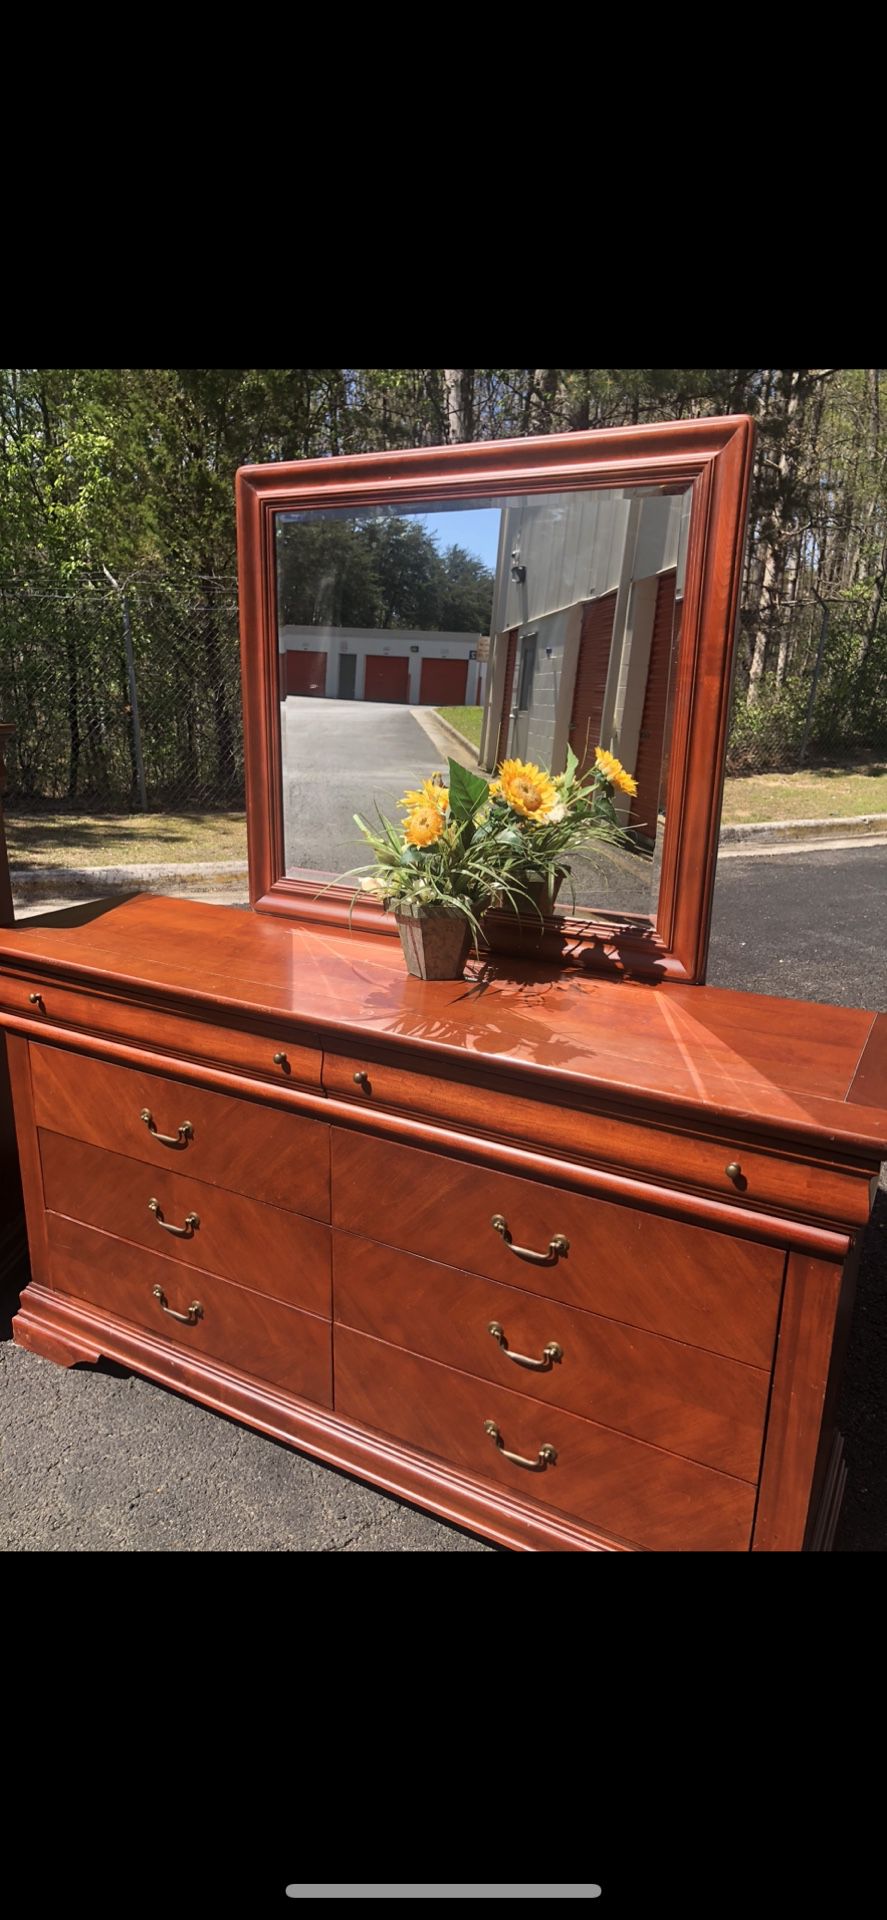 Quality Solid  Wood Long Dresser, Big Drawers, Big Mirror. Drawers Sliding Smoothly Great Condition